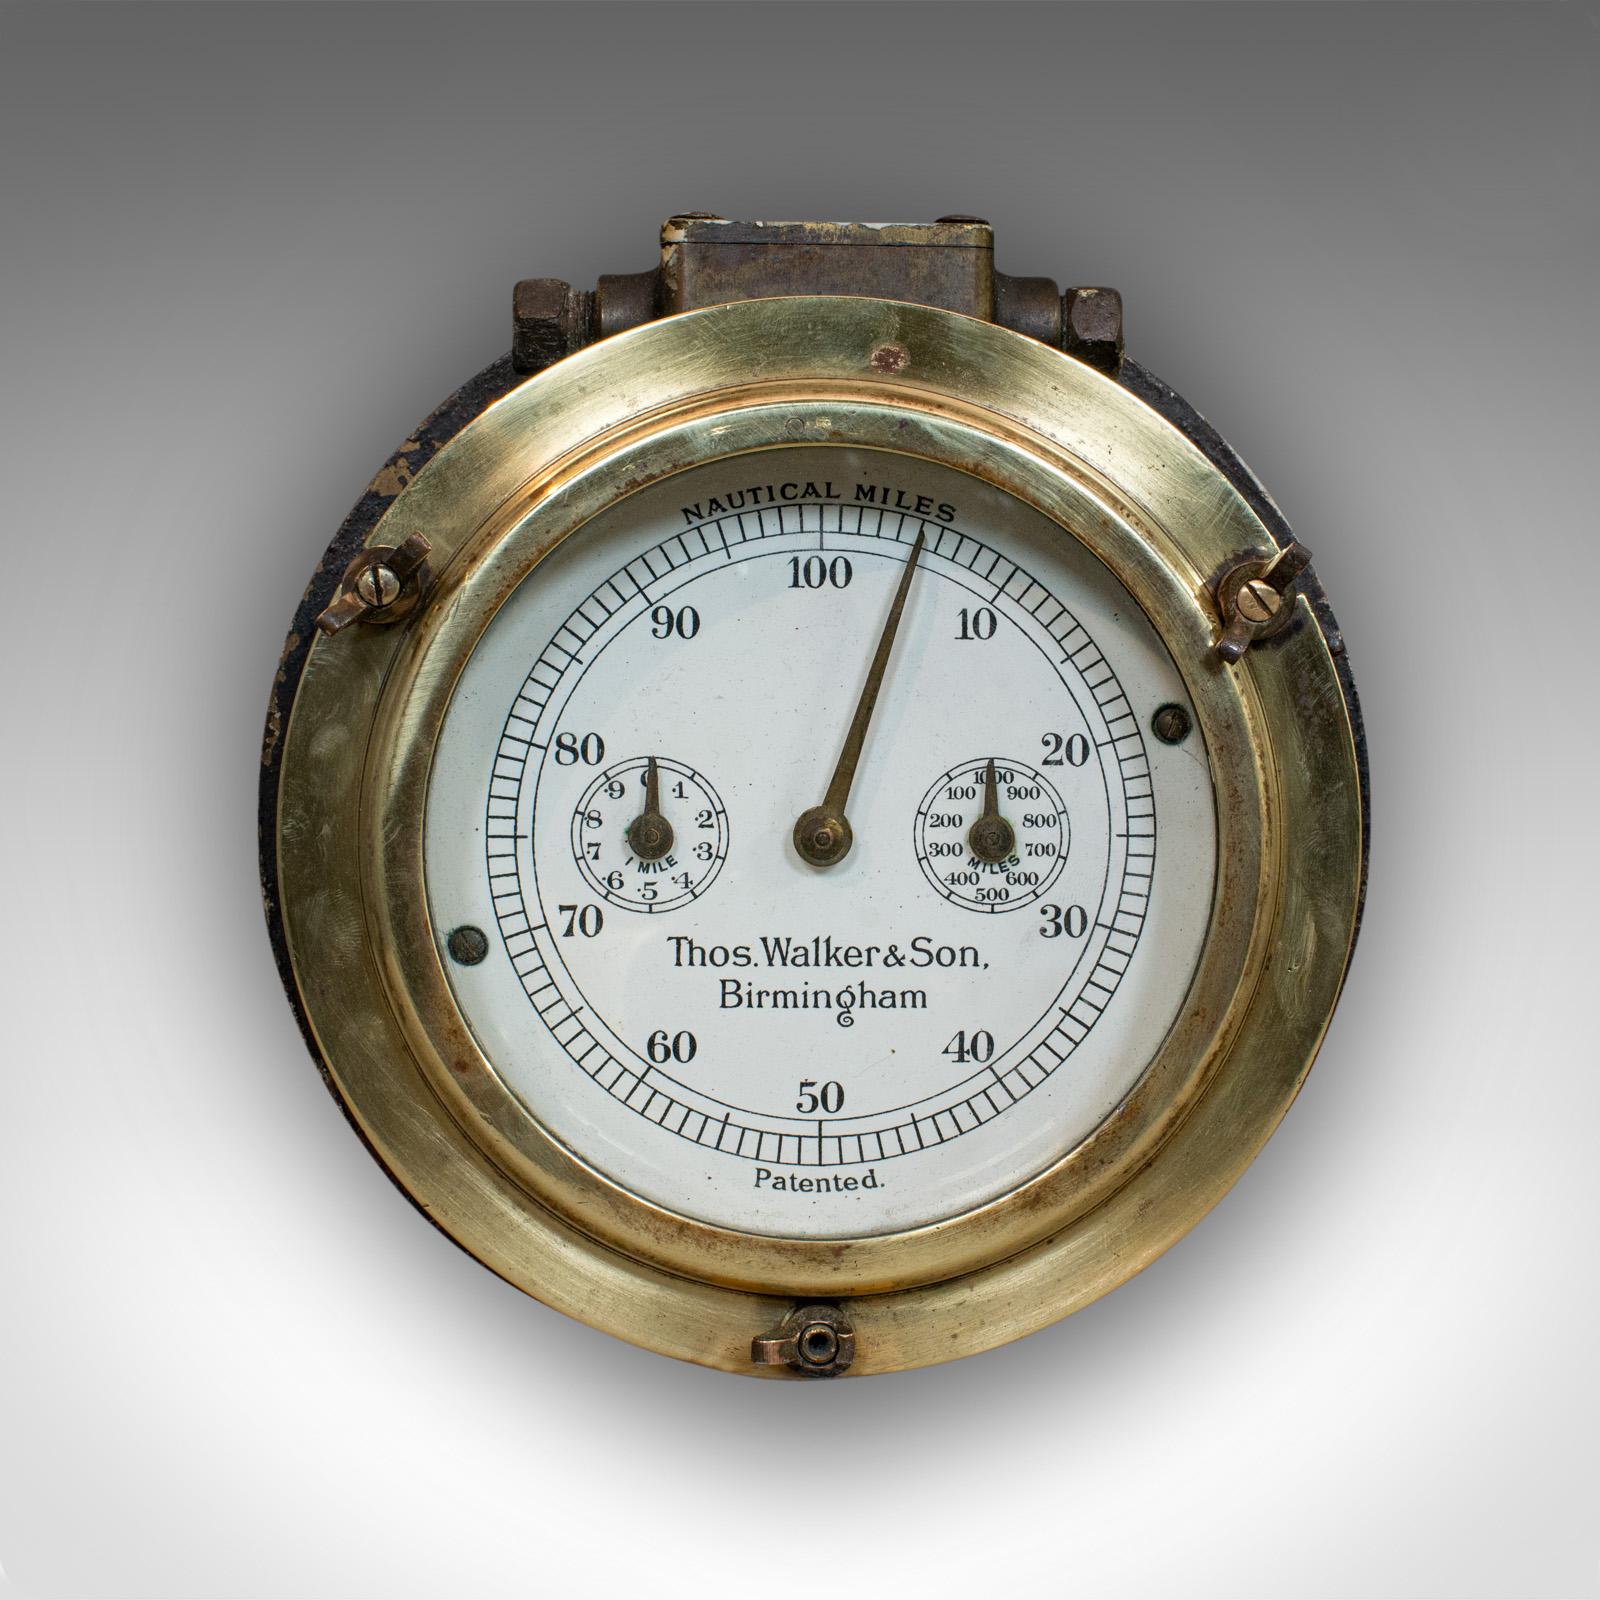 This is an antique ship's log. An English, brass maritime bulkhead mileage log or desk ornament, dating to the early 20th century, circa 1920.

A fine example of walker's patented ship's logs
Displays a desirable aged patina
Polished brass bezel